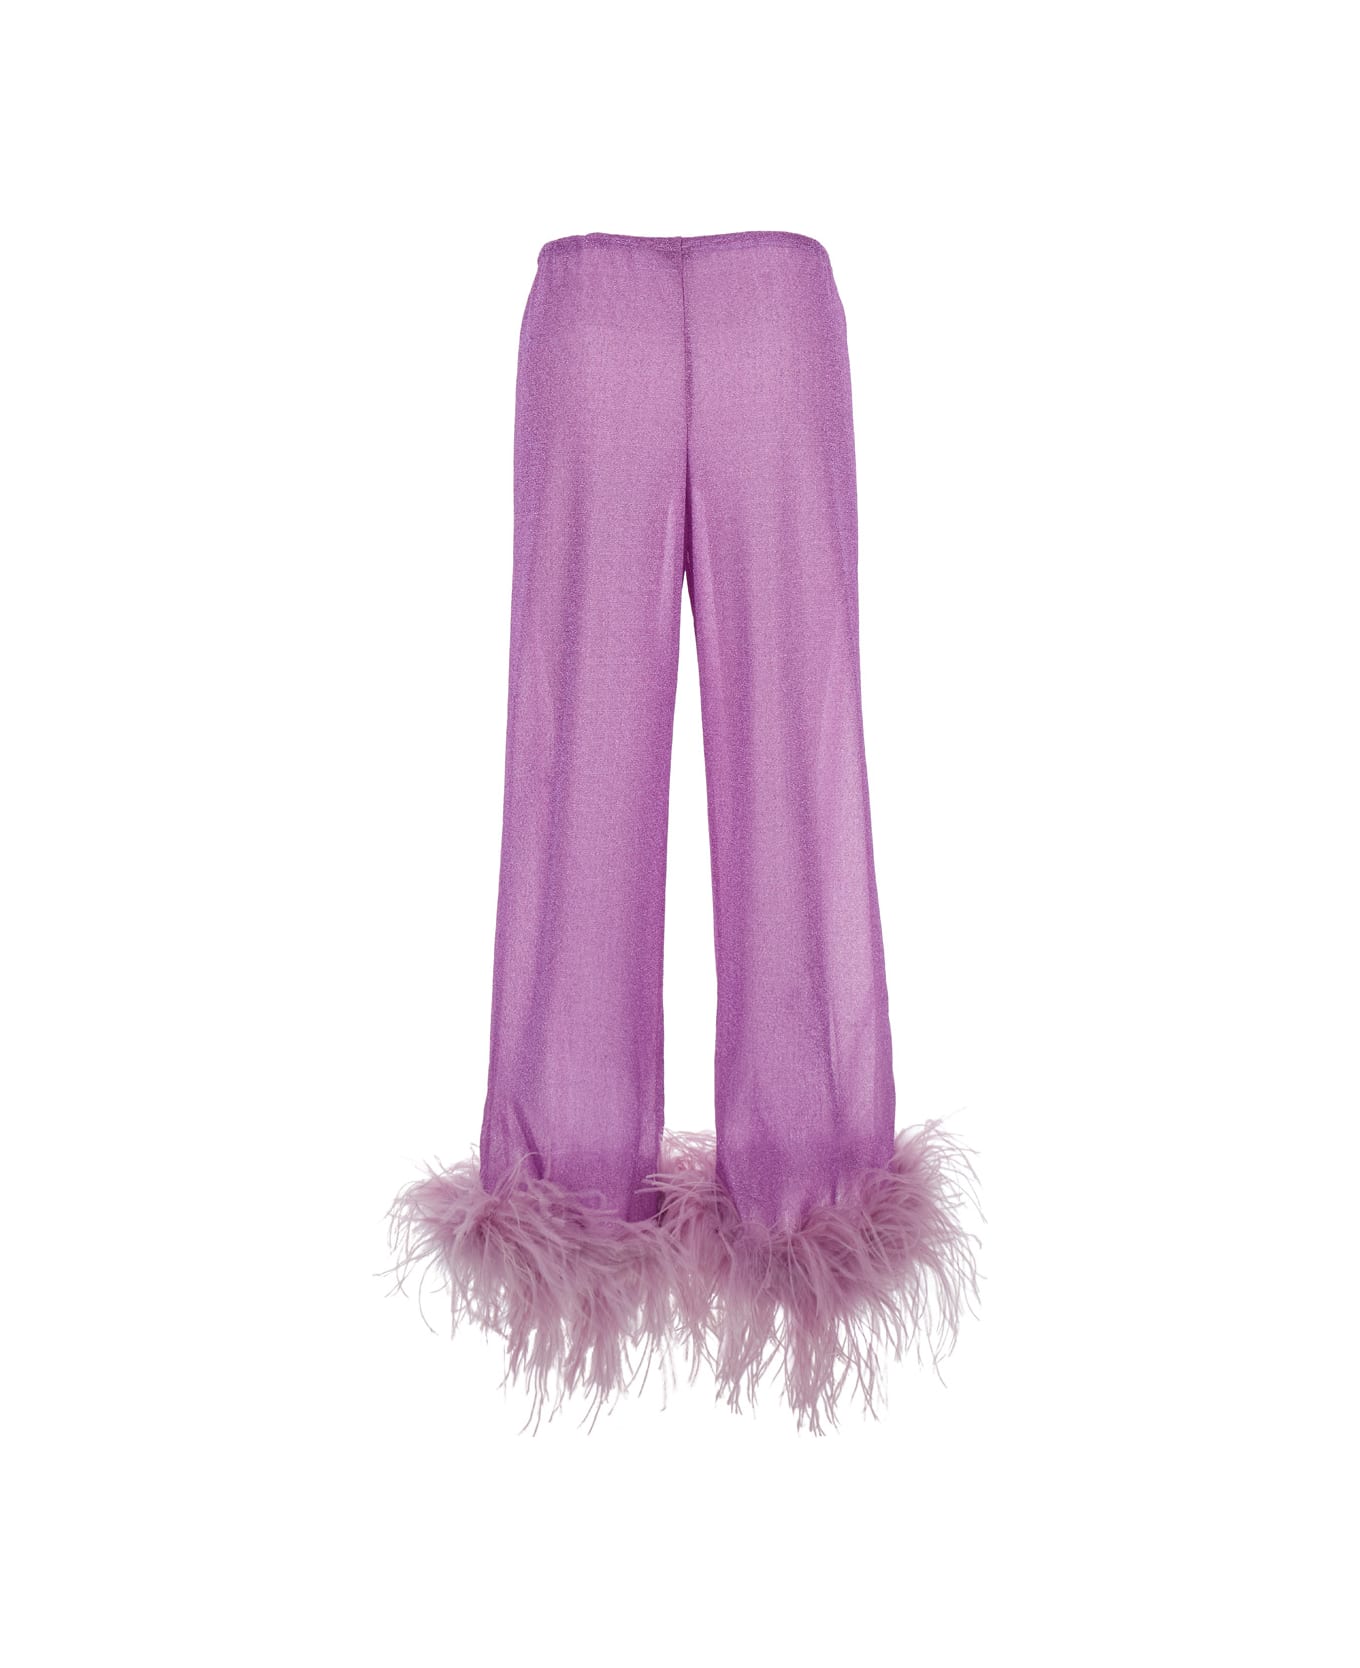 Oseree 'lumière Plumage' Violet Pants With Feathers And Drawstring In Polyamide Blend Woman - Violet